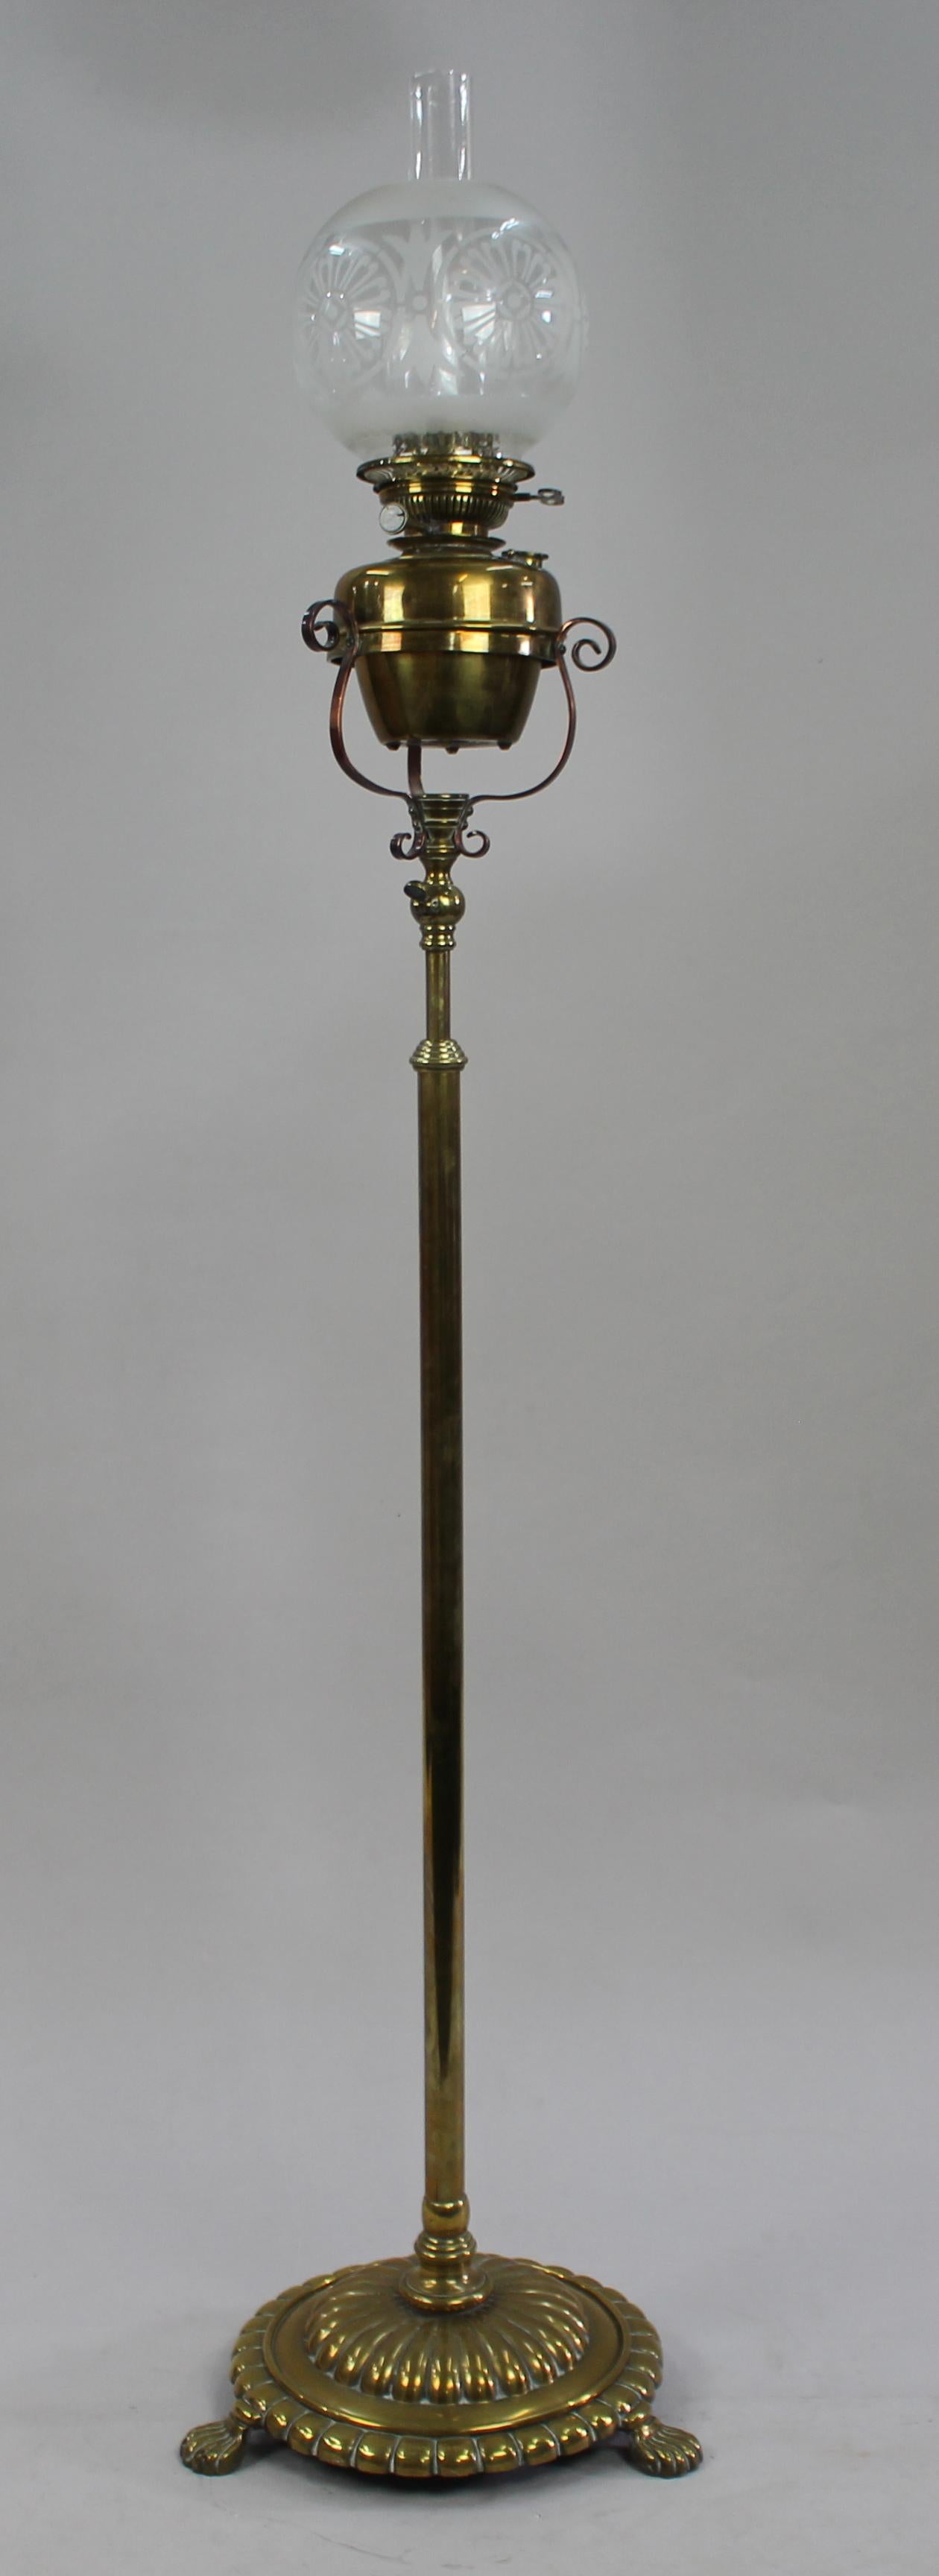 Victorian telescopic brass standard oil lamp


English, nineteenth century. 

Brass font with telescopic shaft. Heavy worked base with three animal form feet 

Height up to approximately 2 metres. 

Width: 36 cm

Offered in good original